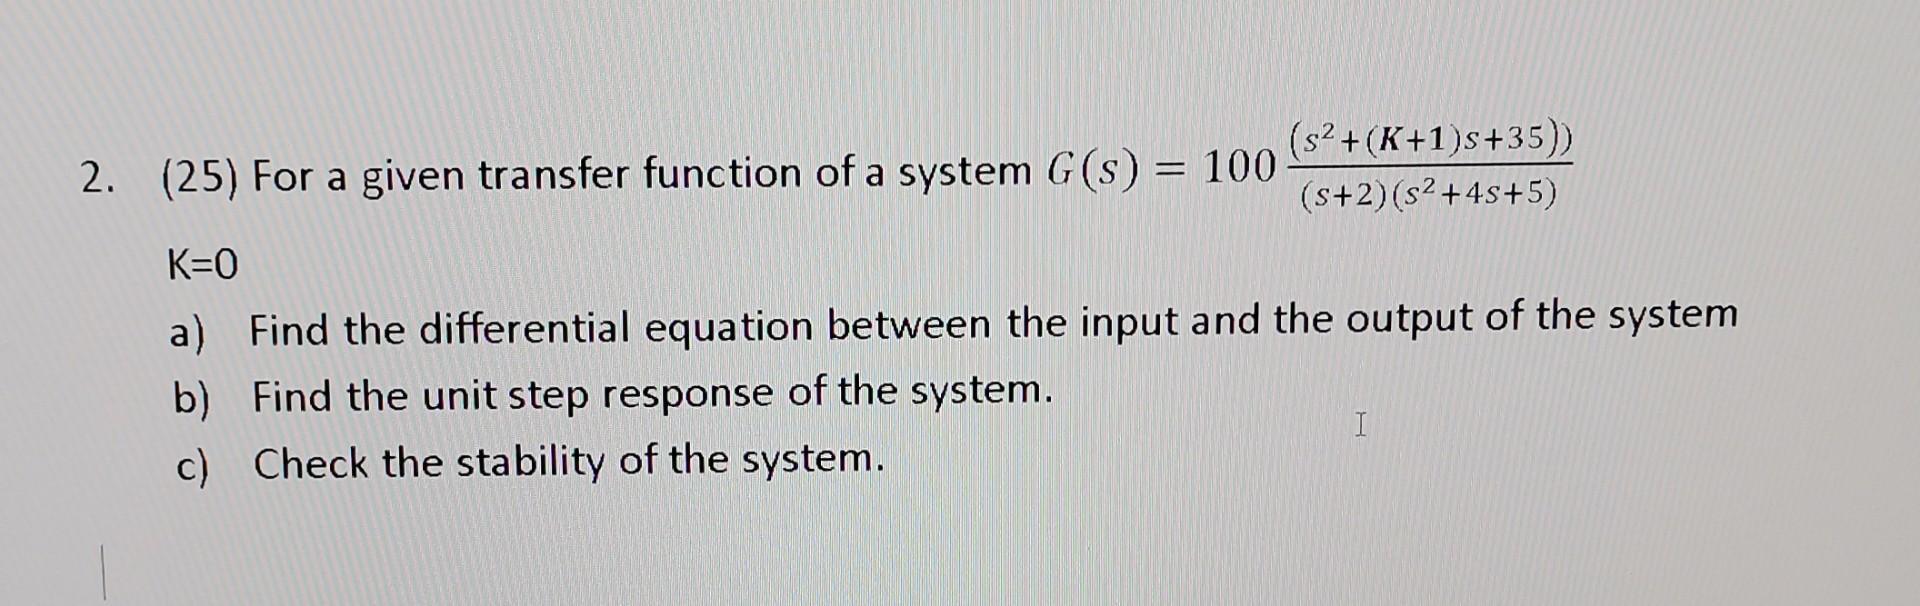 2. (25) For a given transfer function of a system G (s) = 100 (s + (K+1)s+35)) (s+2)(s +4s+5) K=0 a) Find the